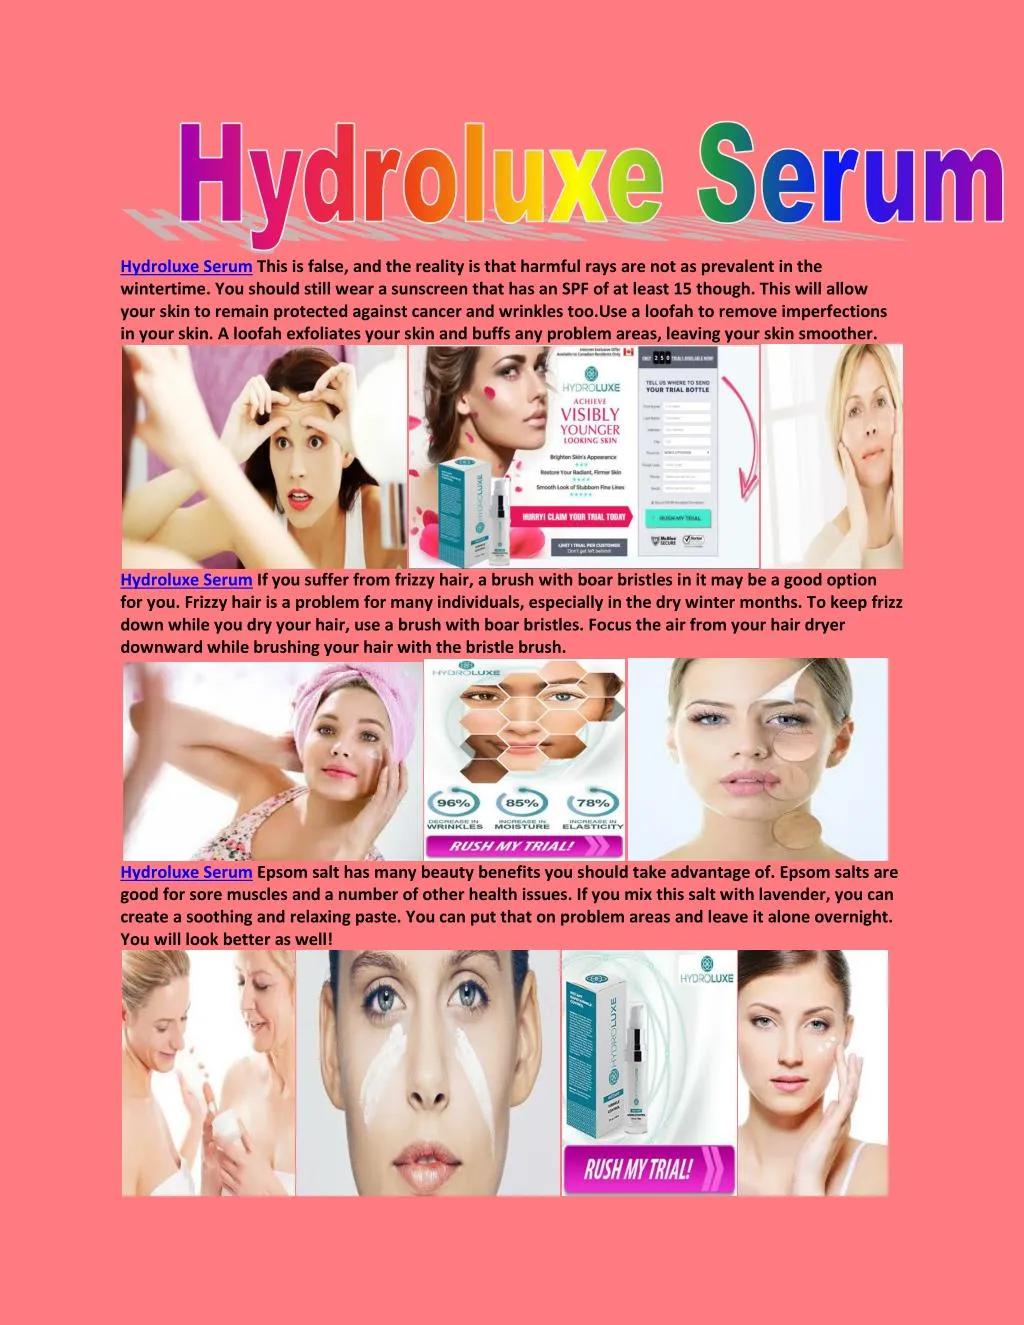 hydroluxe serum this is false and the reality